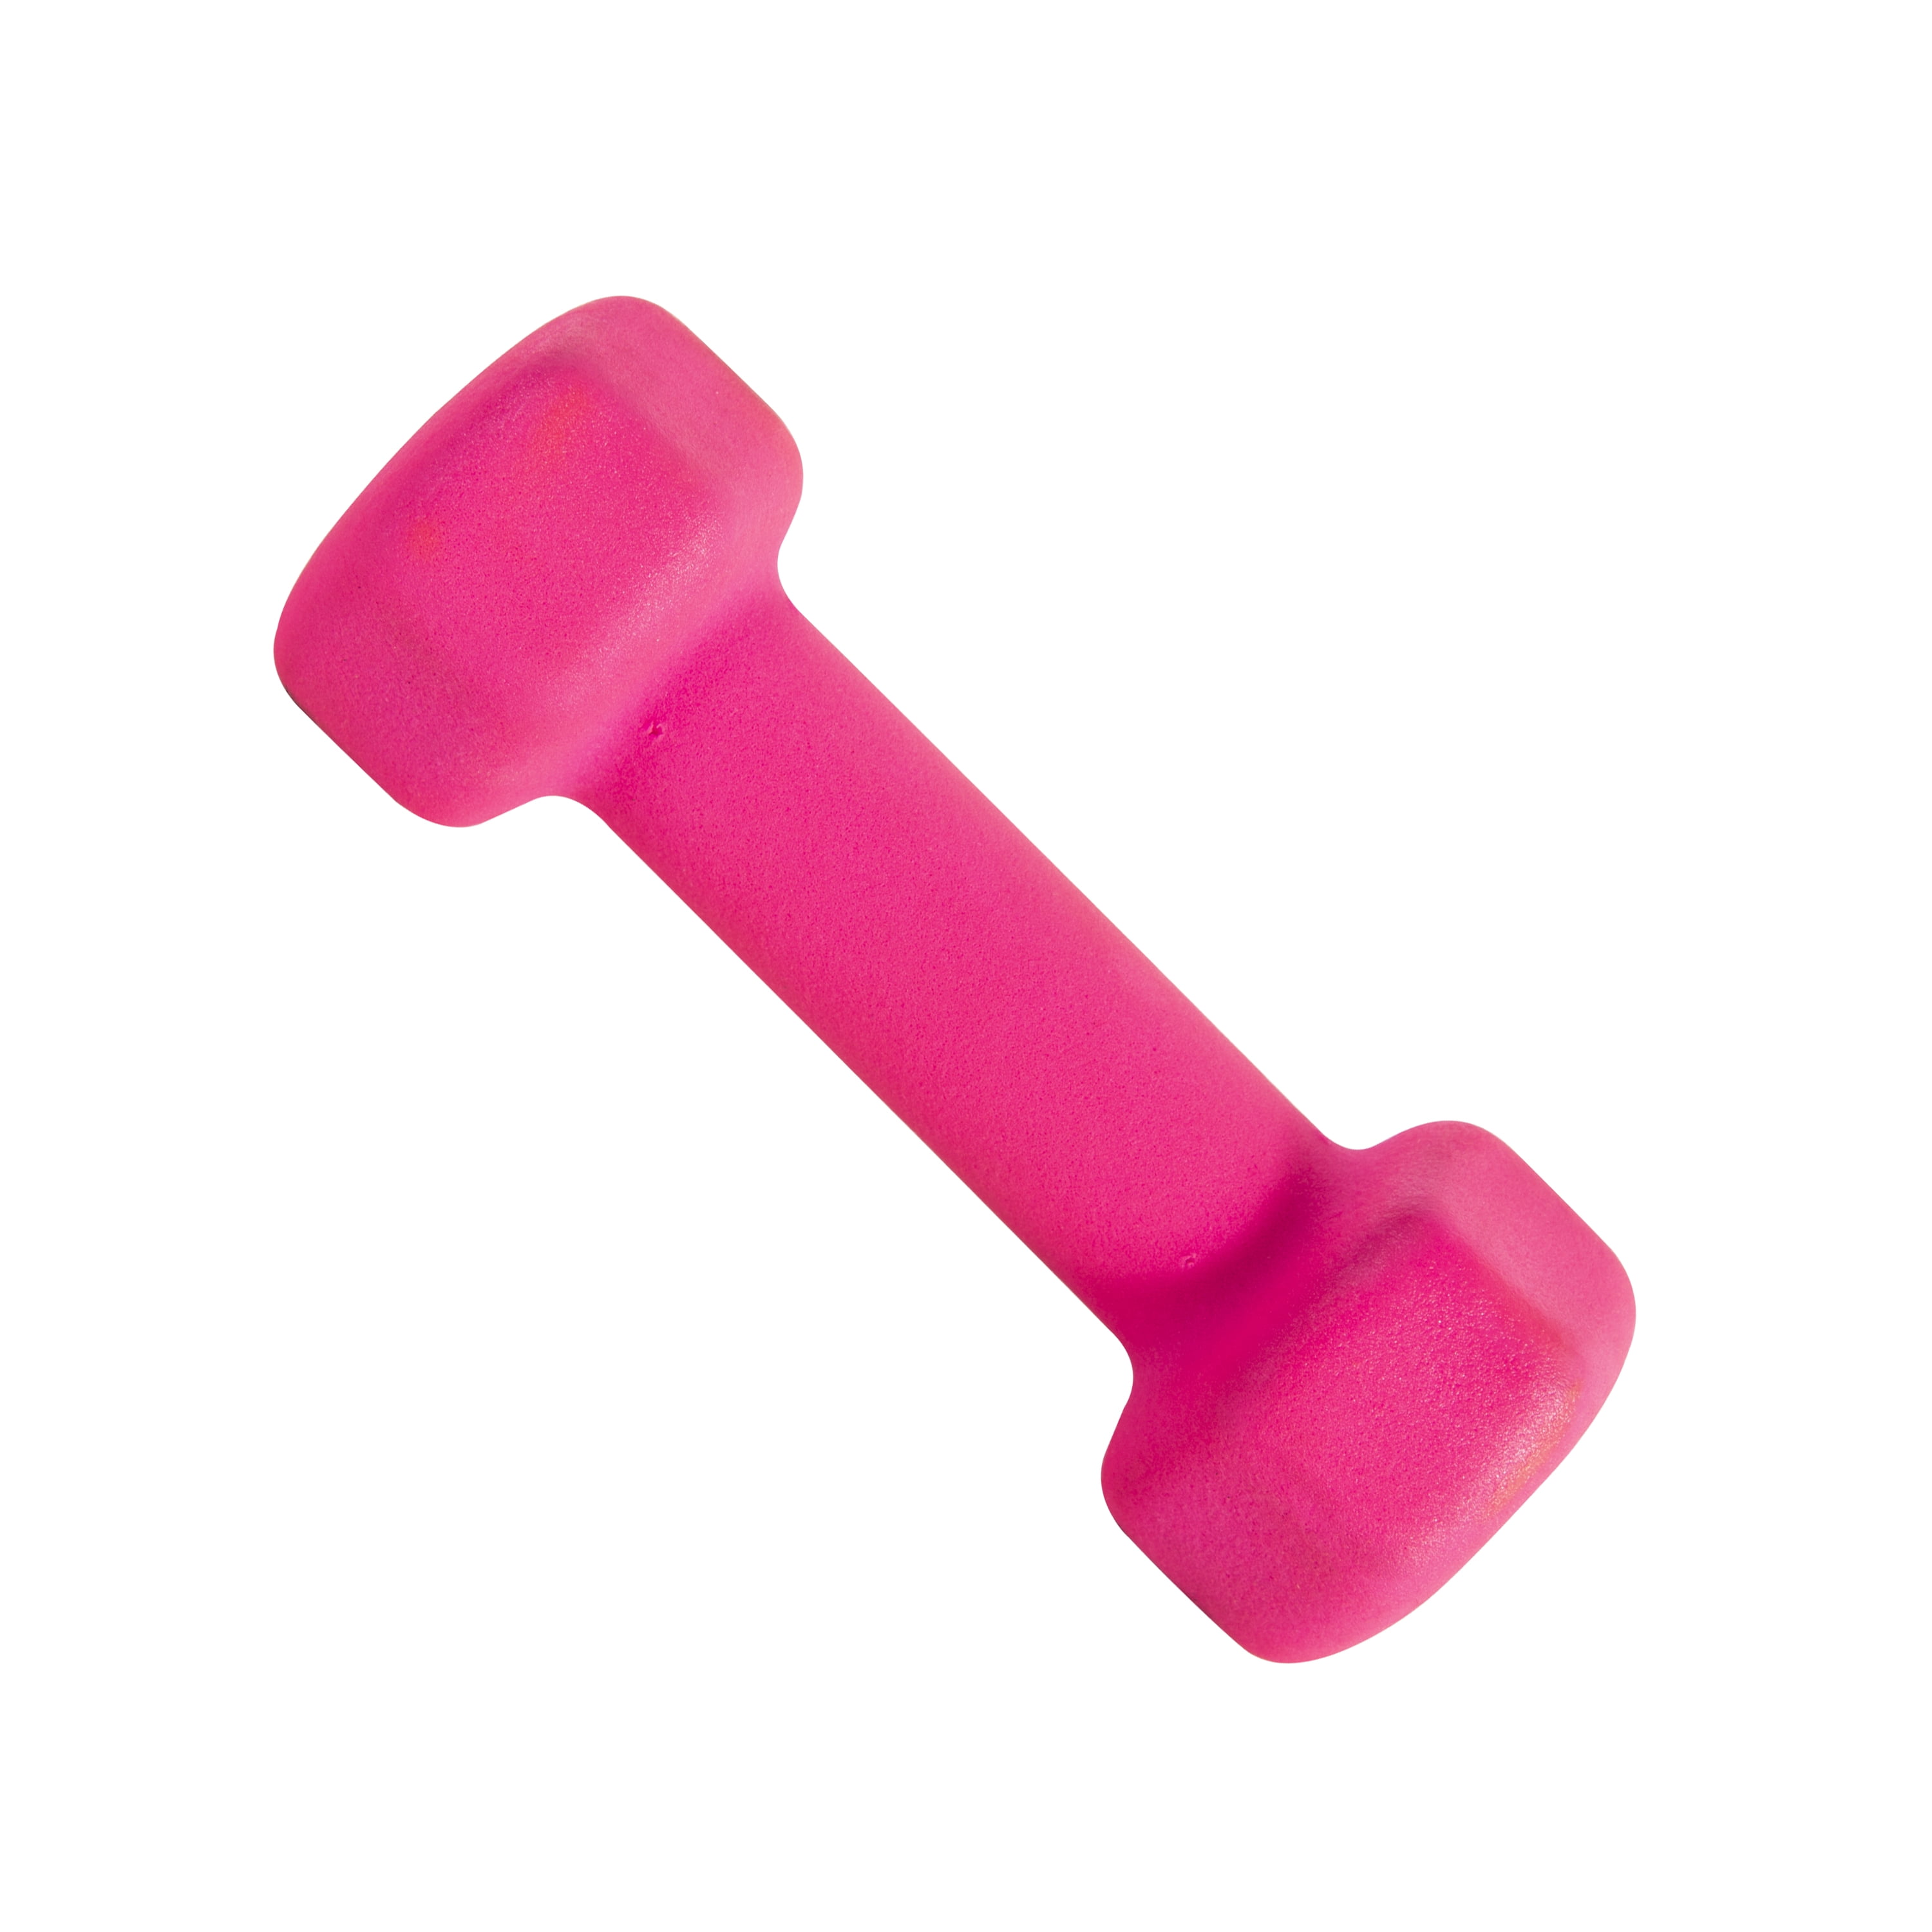 FixtureDisplays? Neoprene Coated Dumbbell Weights 3 Pound, Single, Pink  15207-3LB-1PC